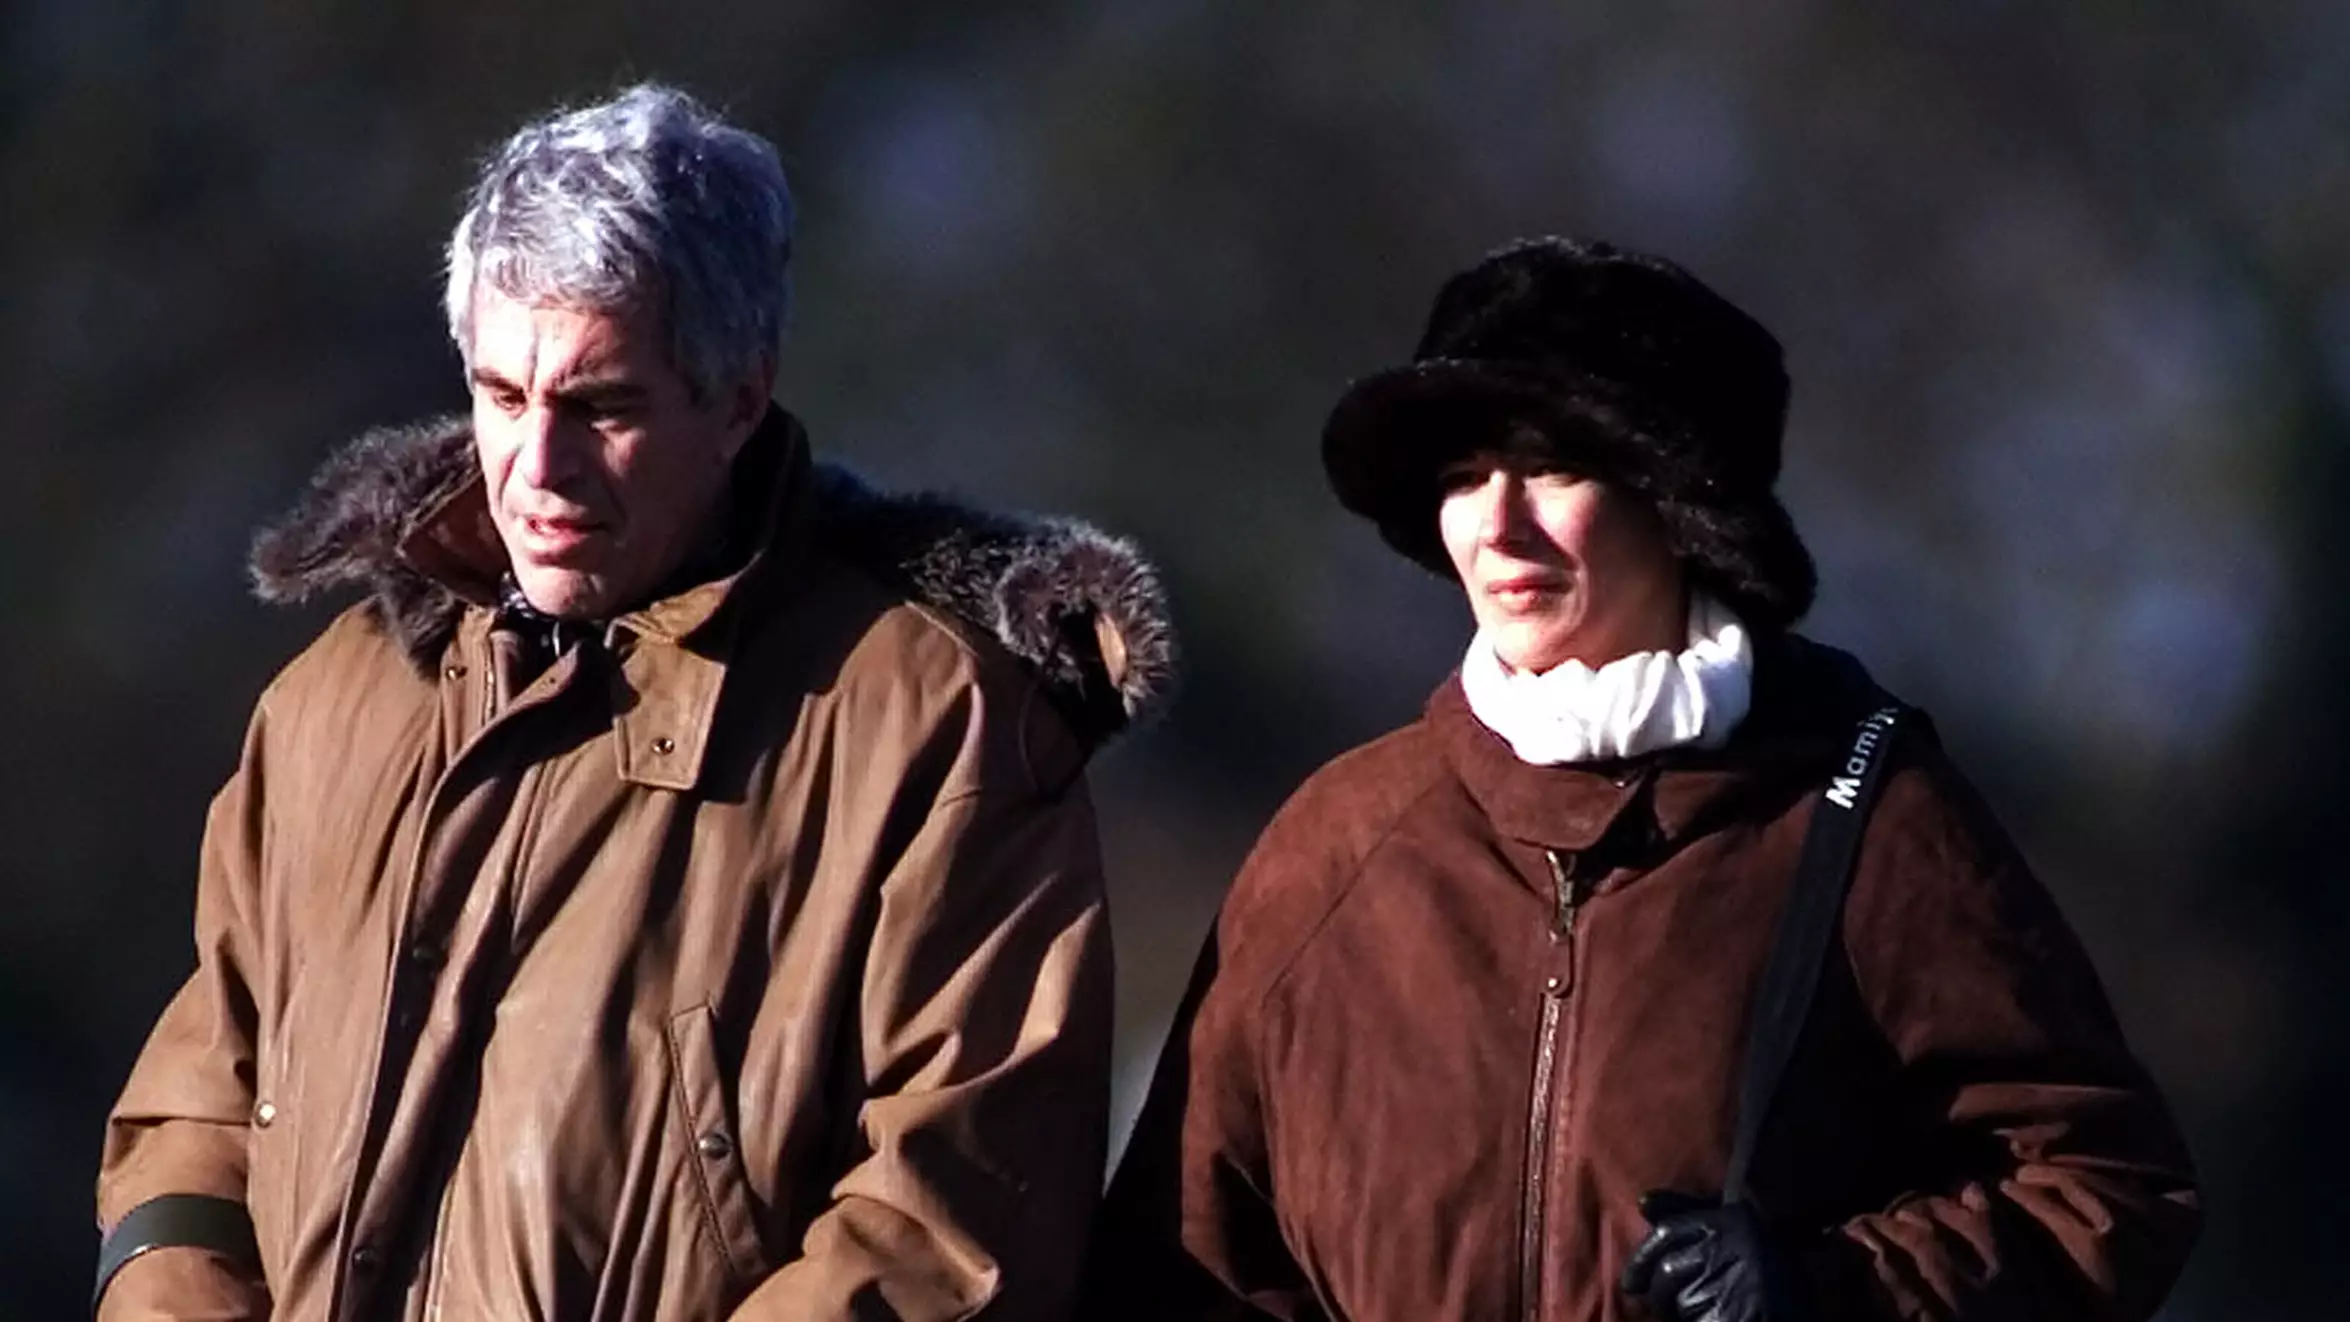 BREAKING: Ghislaine Maxwell Arrested In Connection With Jeffrey Epstein